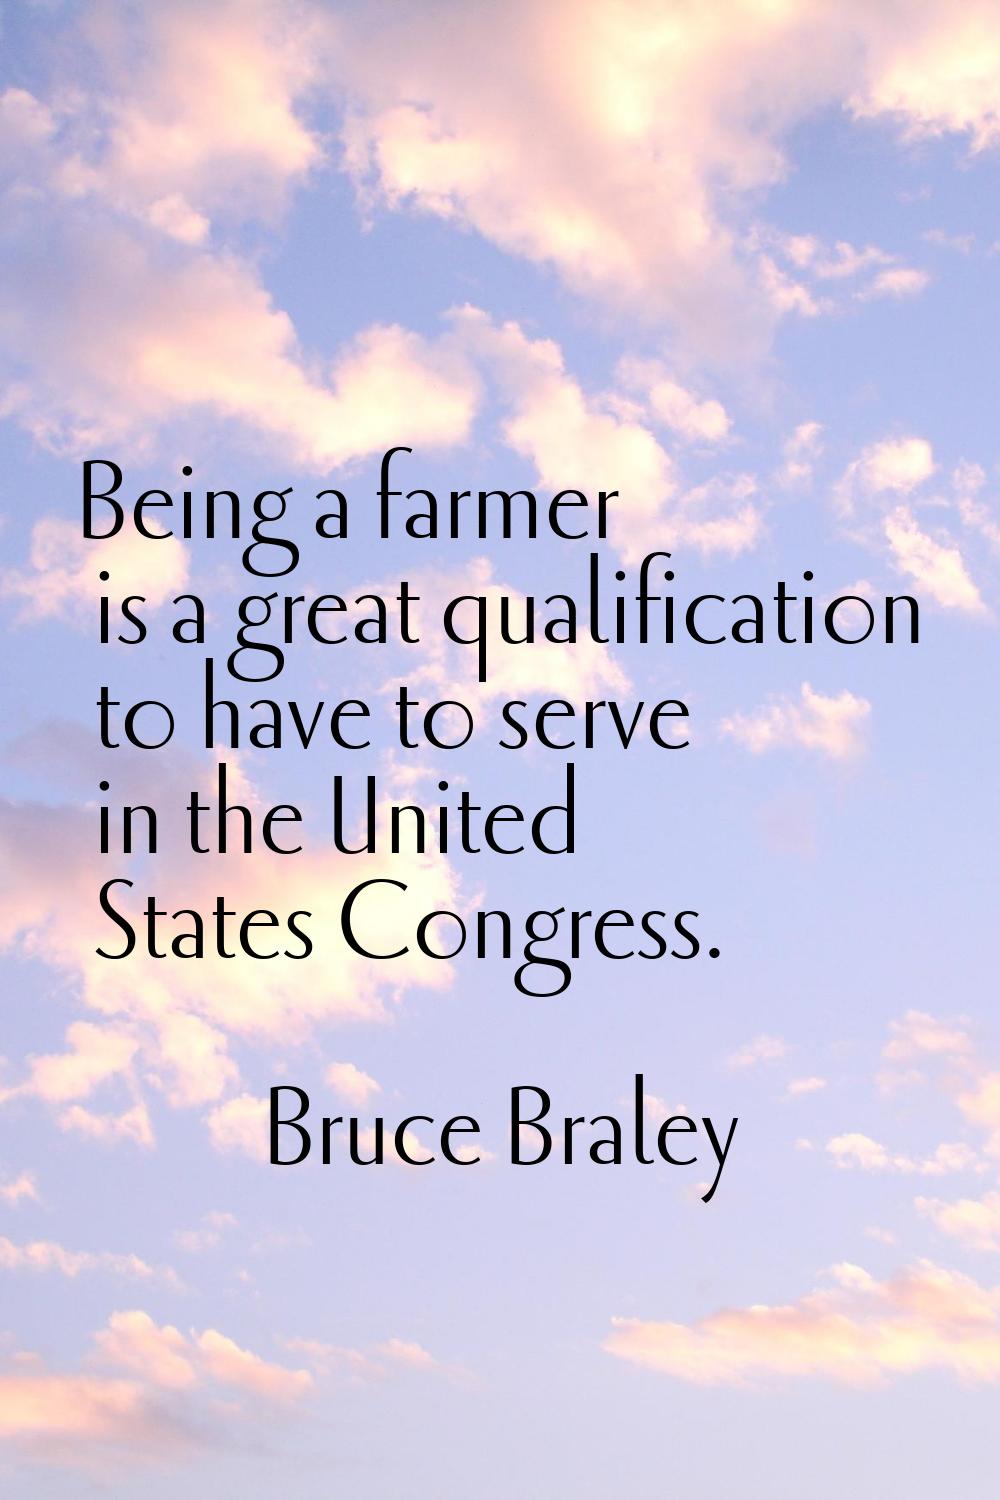 Being a farmer is a great qualification to have to serve in the United States Congress.